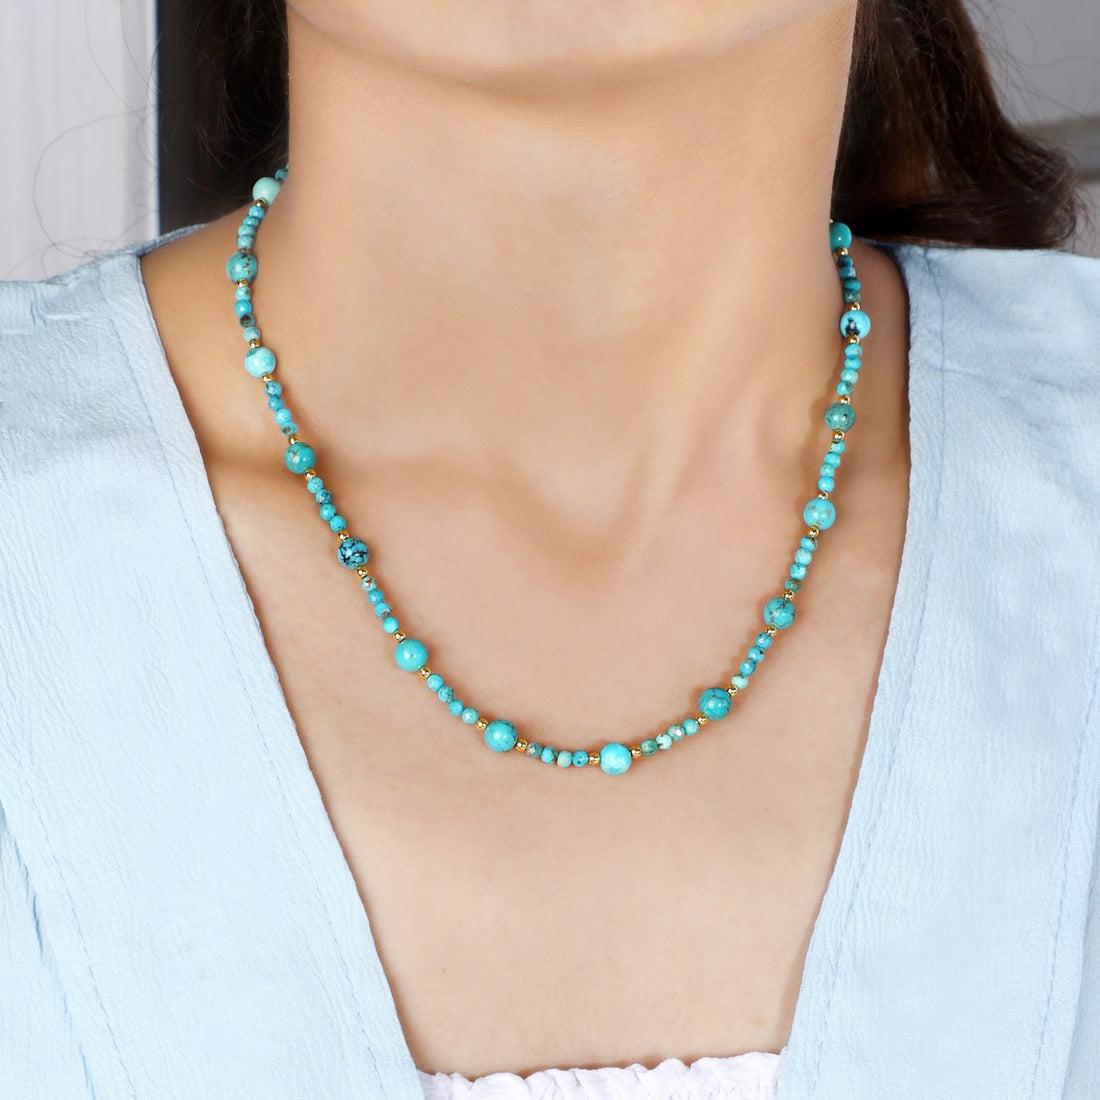 Adorn Yourself with American Turquoise and Hematite Necklace